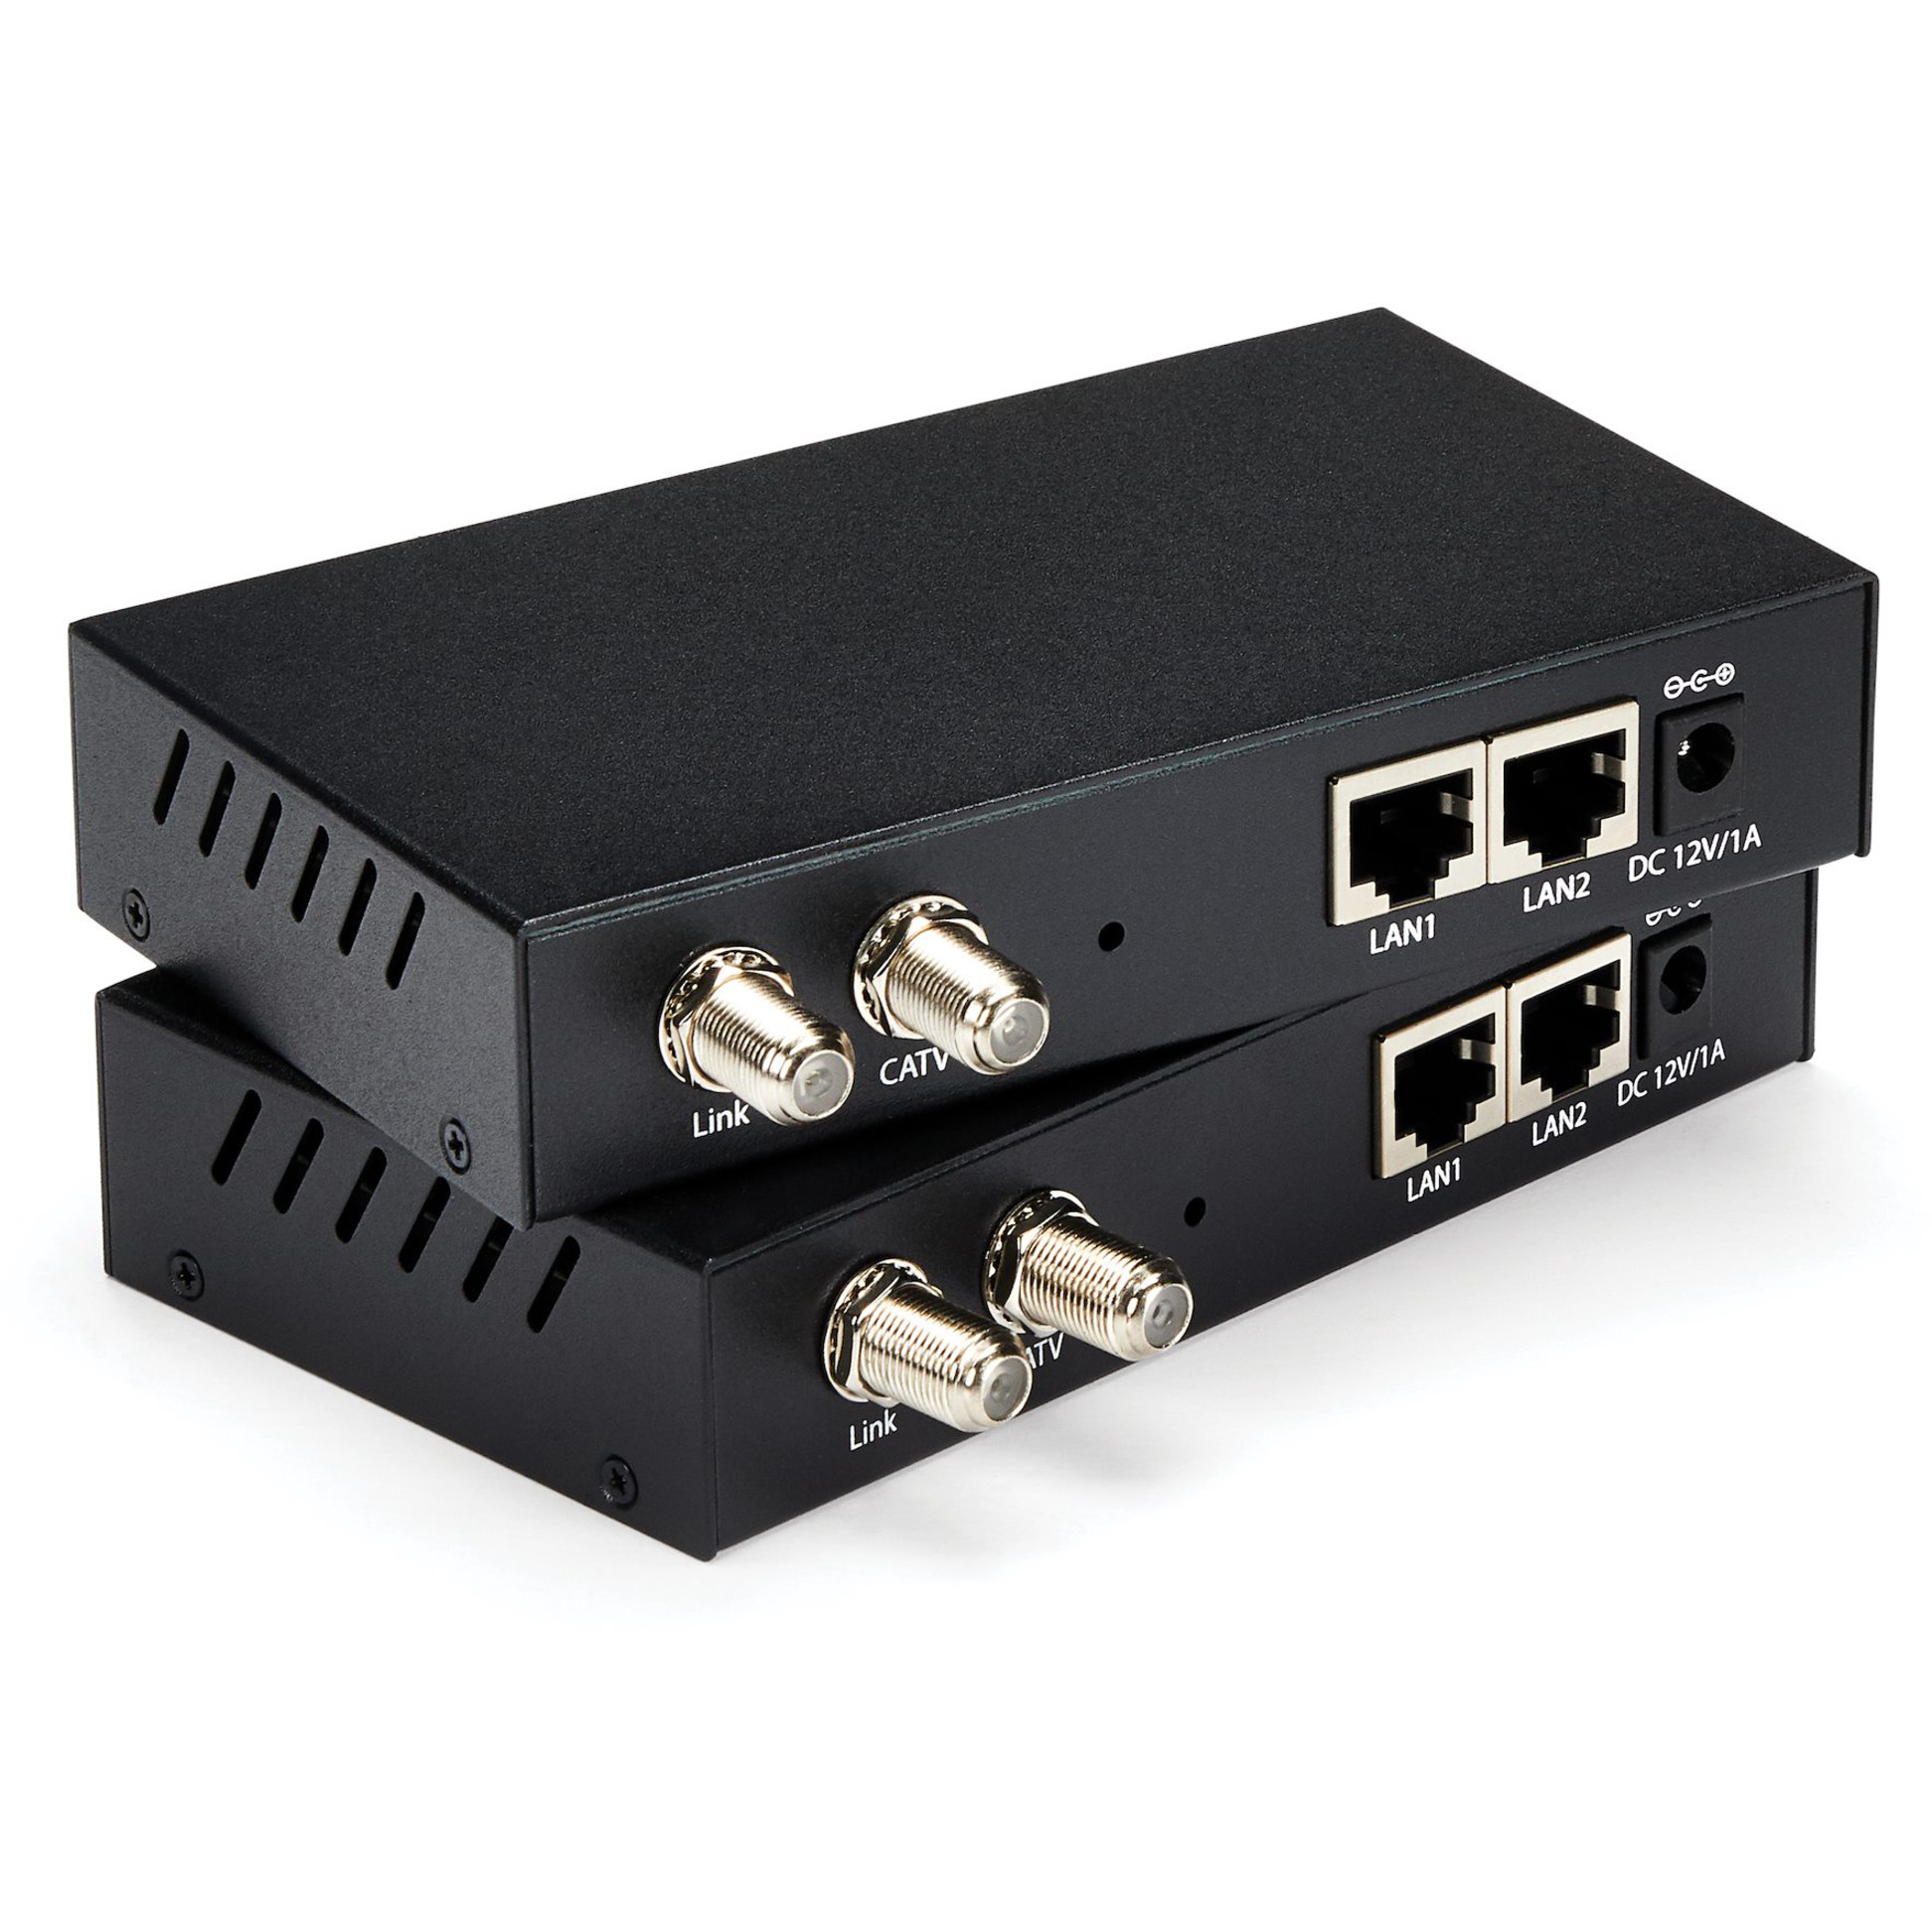 Startech .com Gigabit Ethernet over Coaxial Unmanaged Network Extender Kit2.4kmExtend an Ethernet network over Coaxial cable up to 1.5 mil… EOC1110K